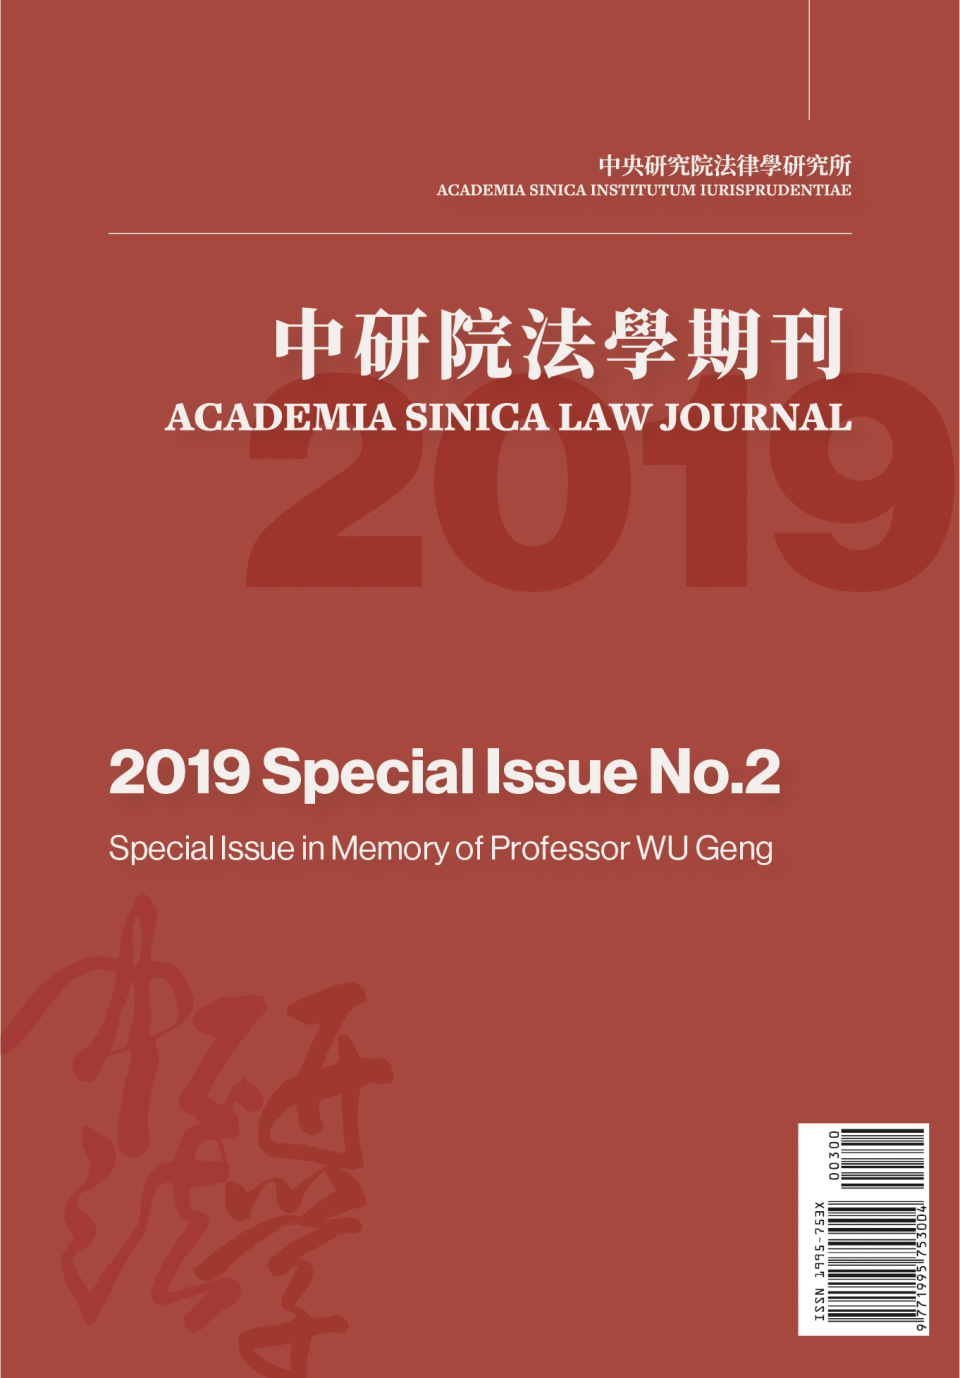 2019 Special Issue No.2